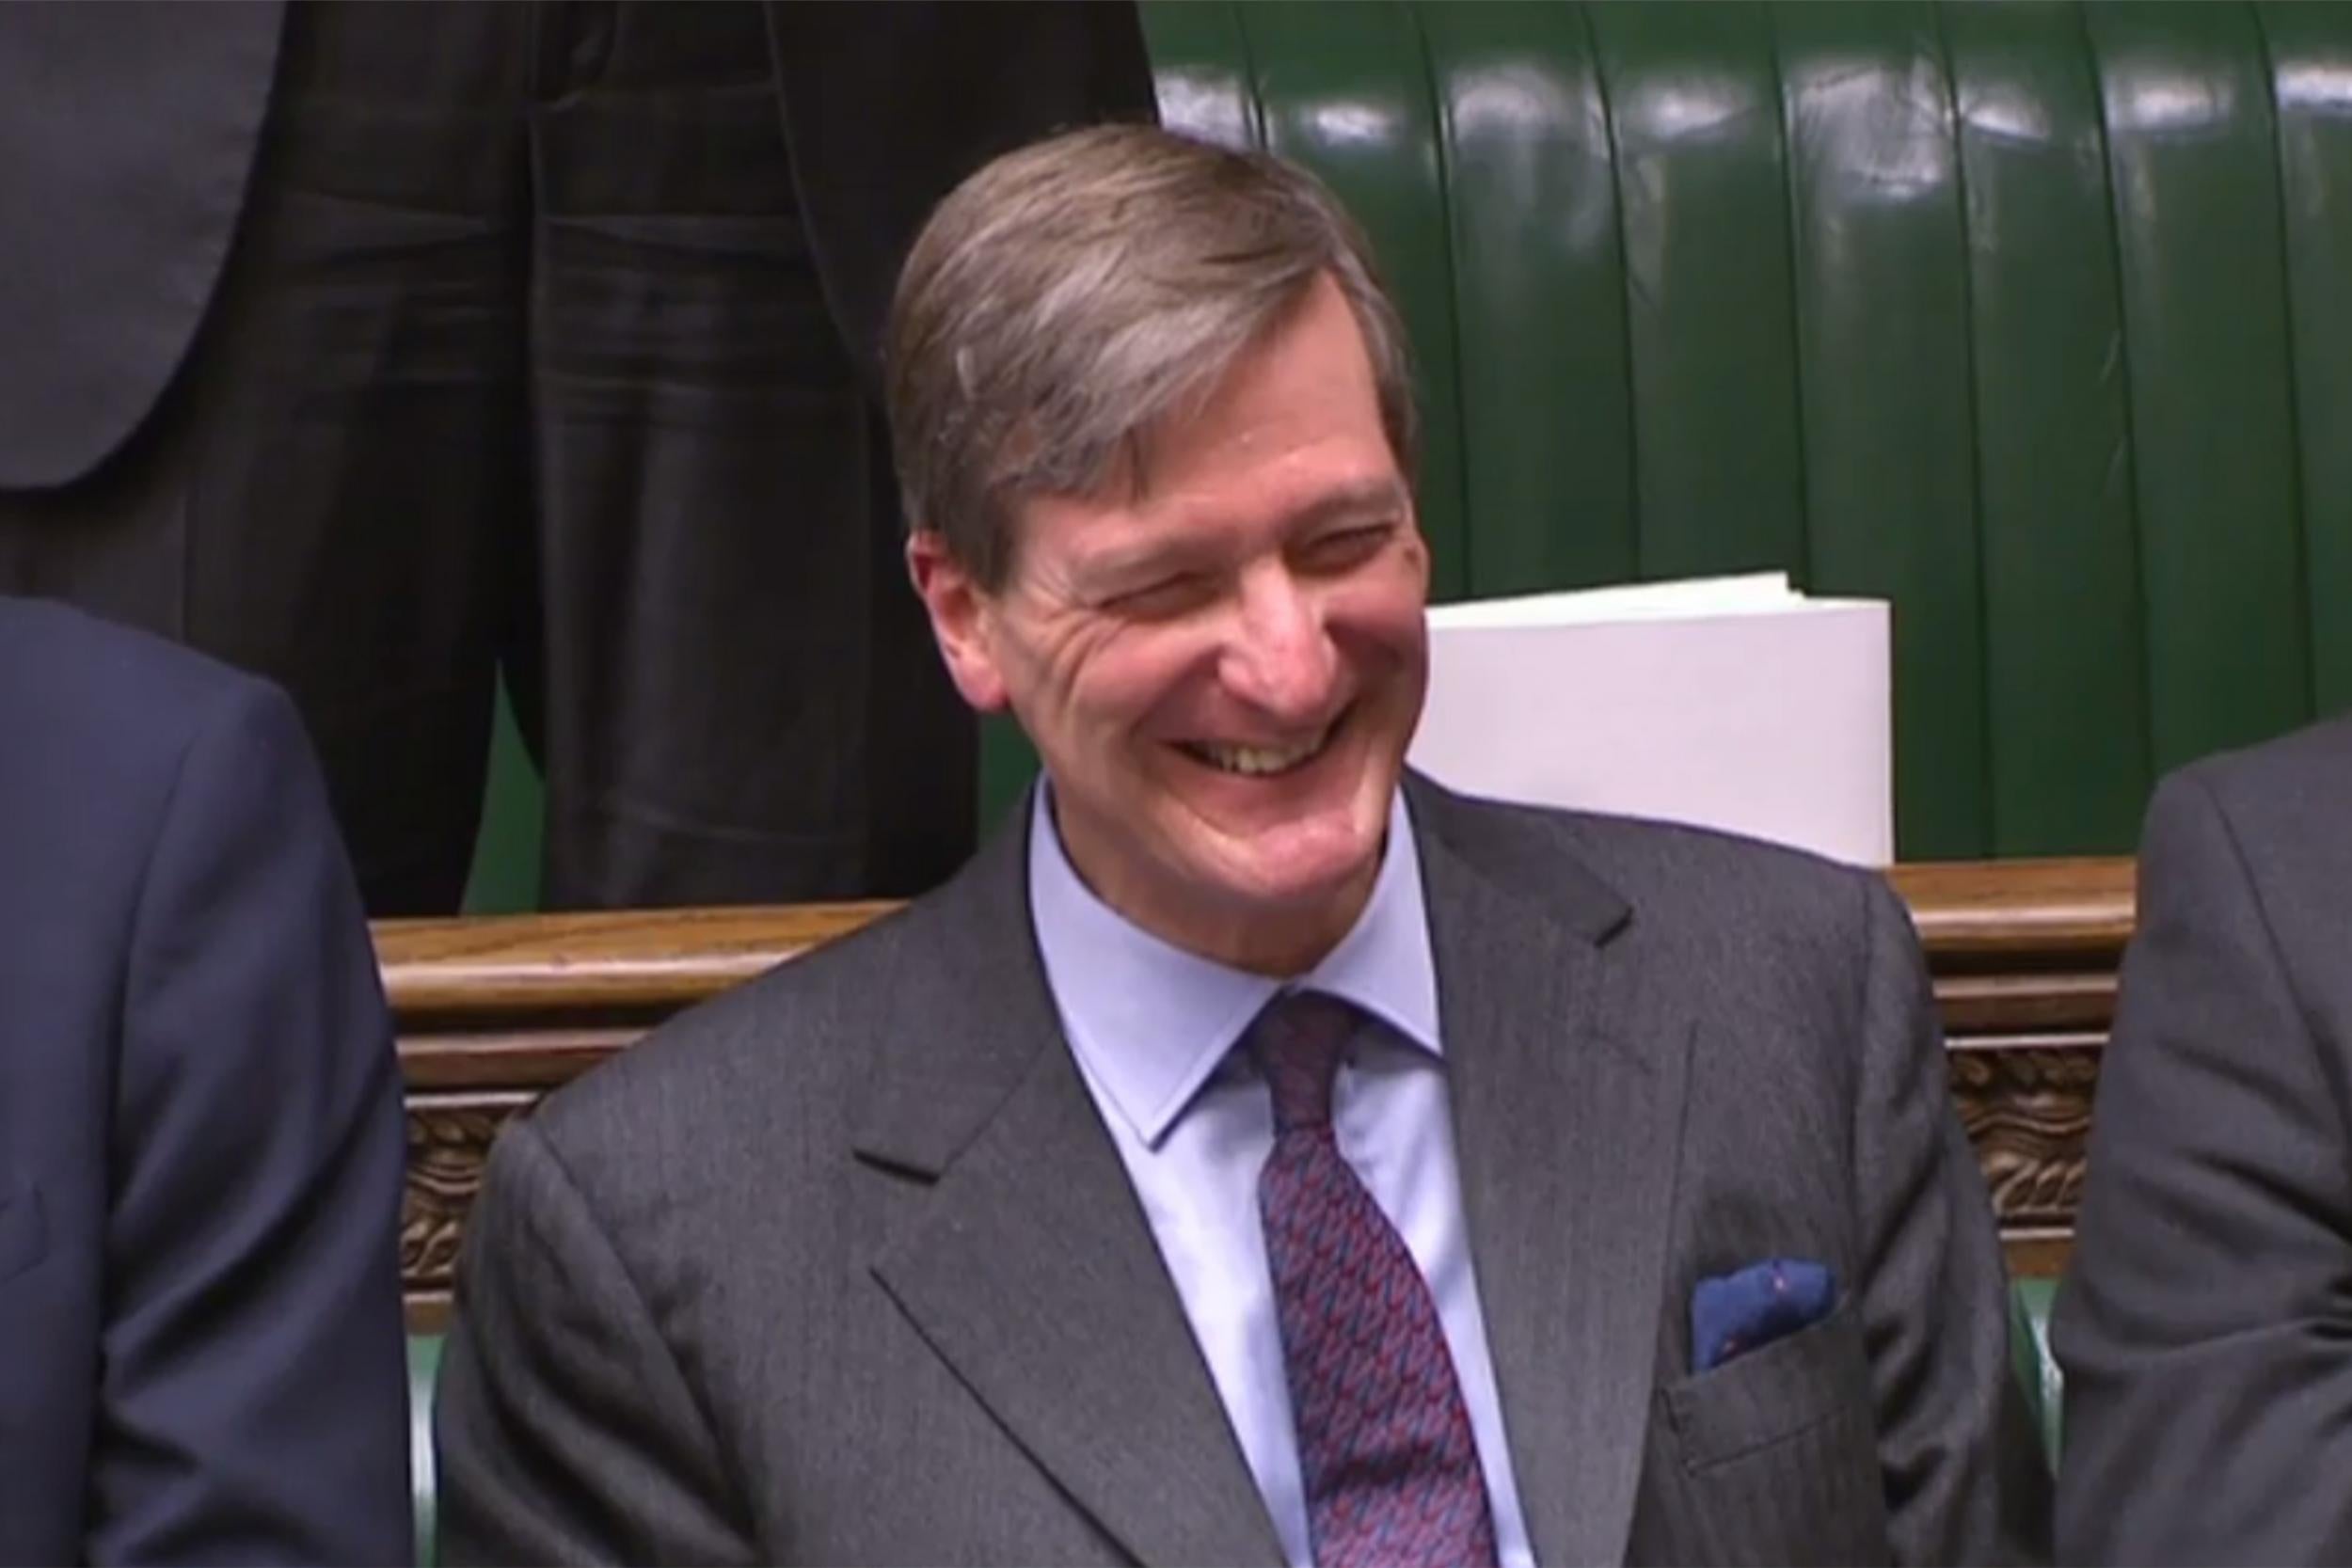 Dominic Grieve was one of 11 ‘self-consumed malcontent’ MPs splashed across the Daily Mail